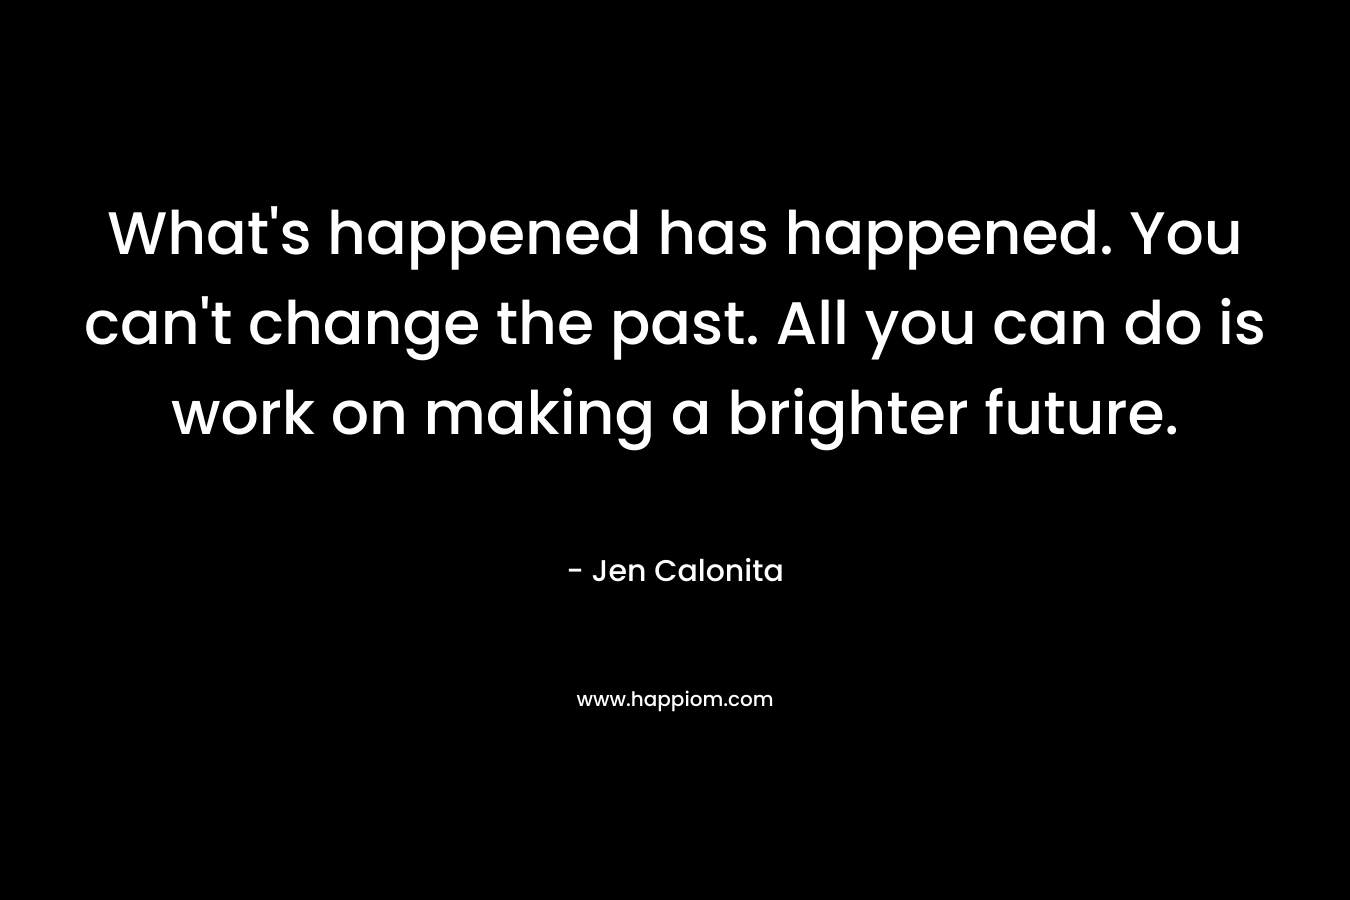 What’s happened has happened. You can’t change the past. All you can do is work on making a brighter future. – Jen Calonita